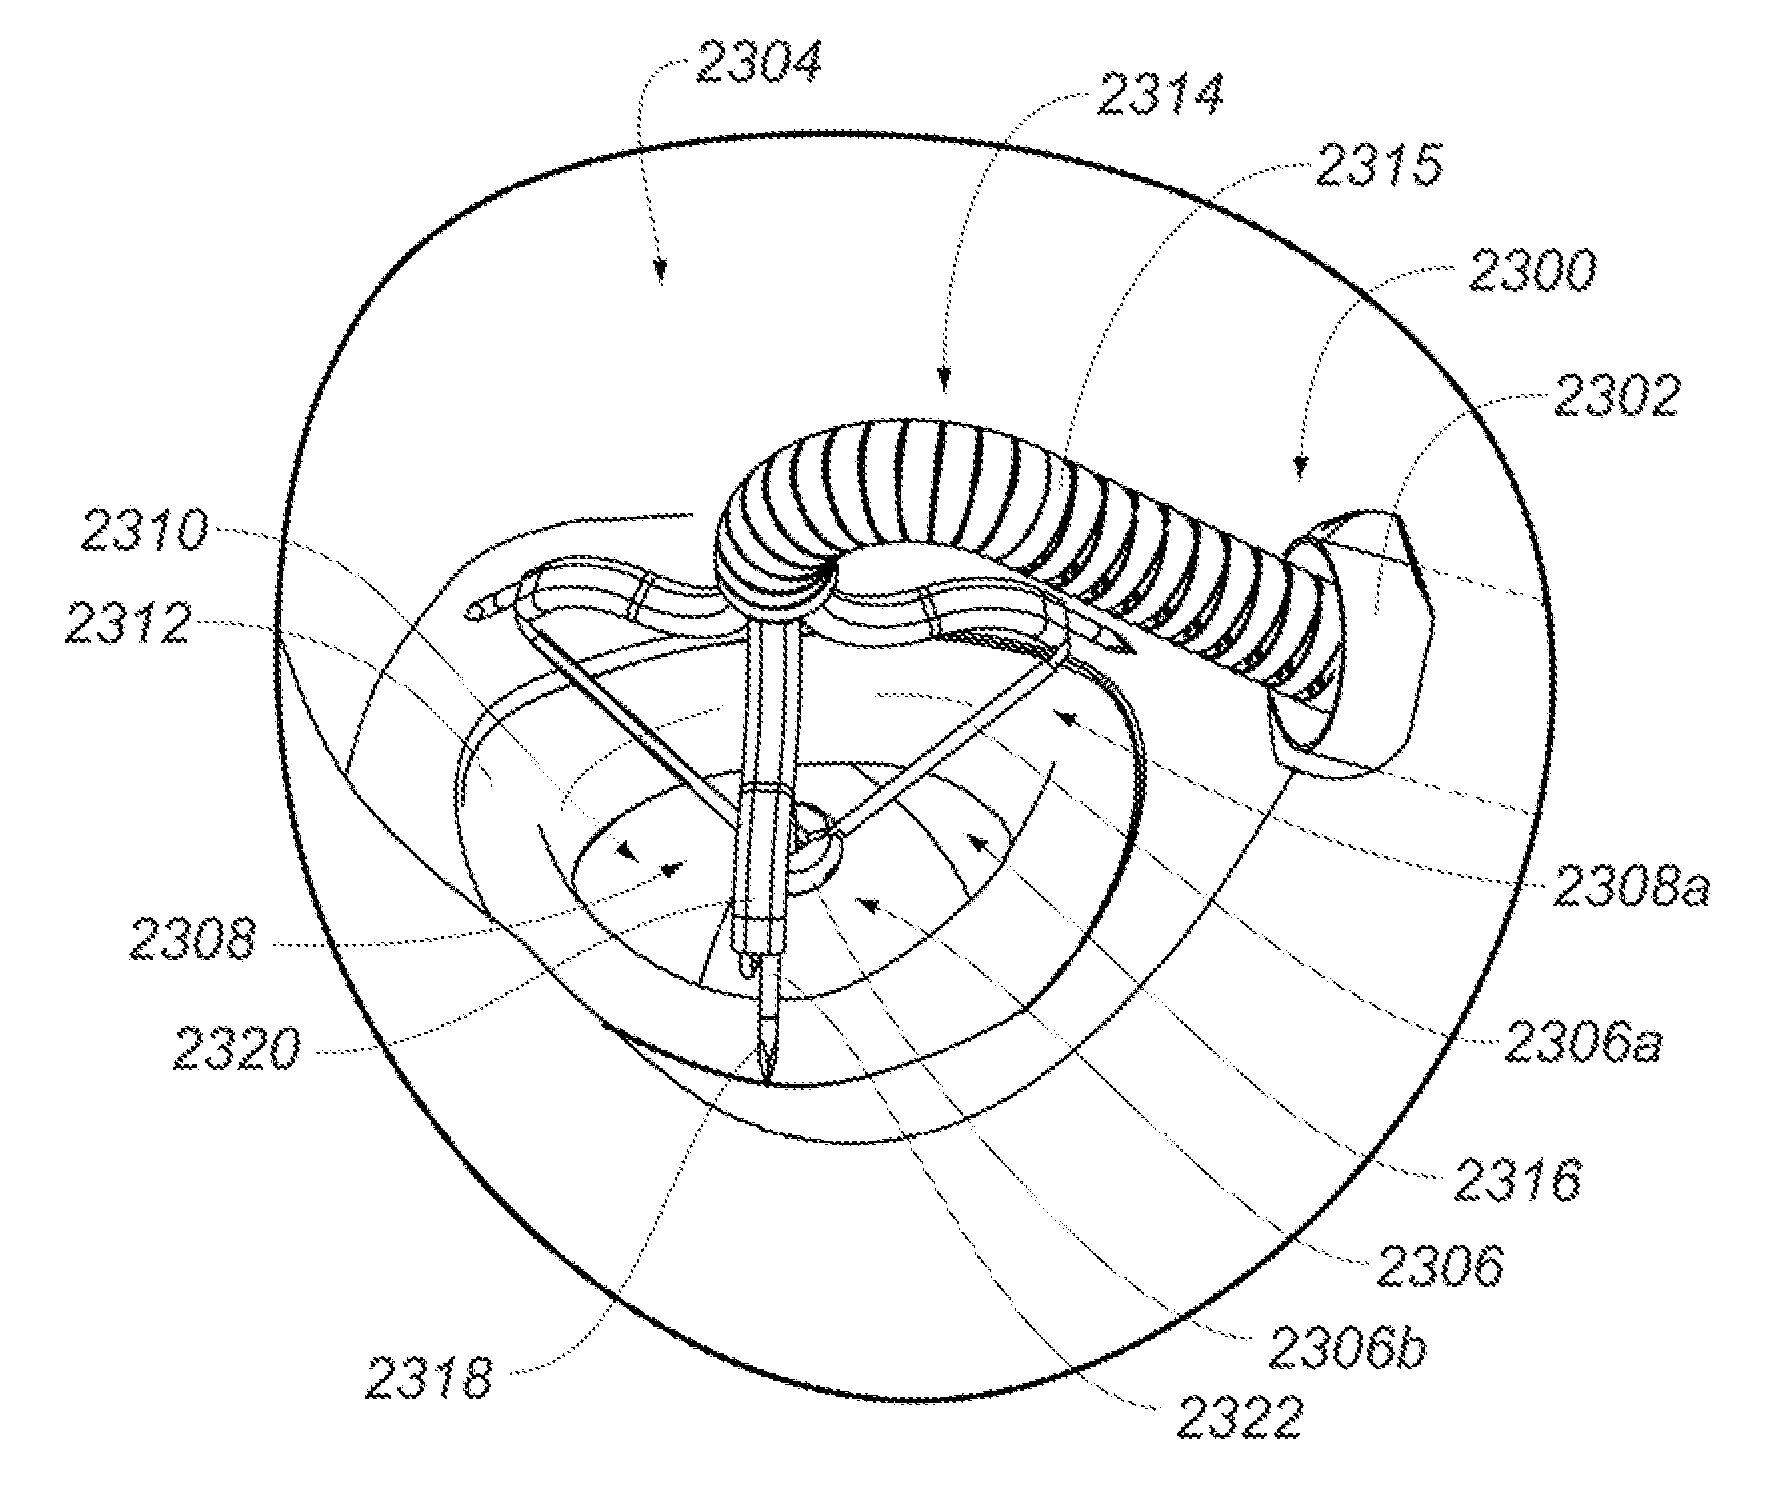 Medical device, kit and method for constricting tissue or a bodily orifice, for example, a mitral valve